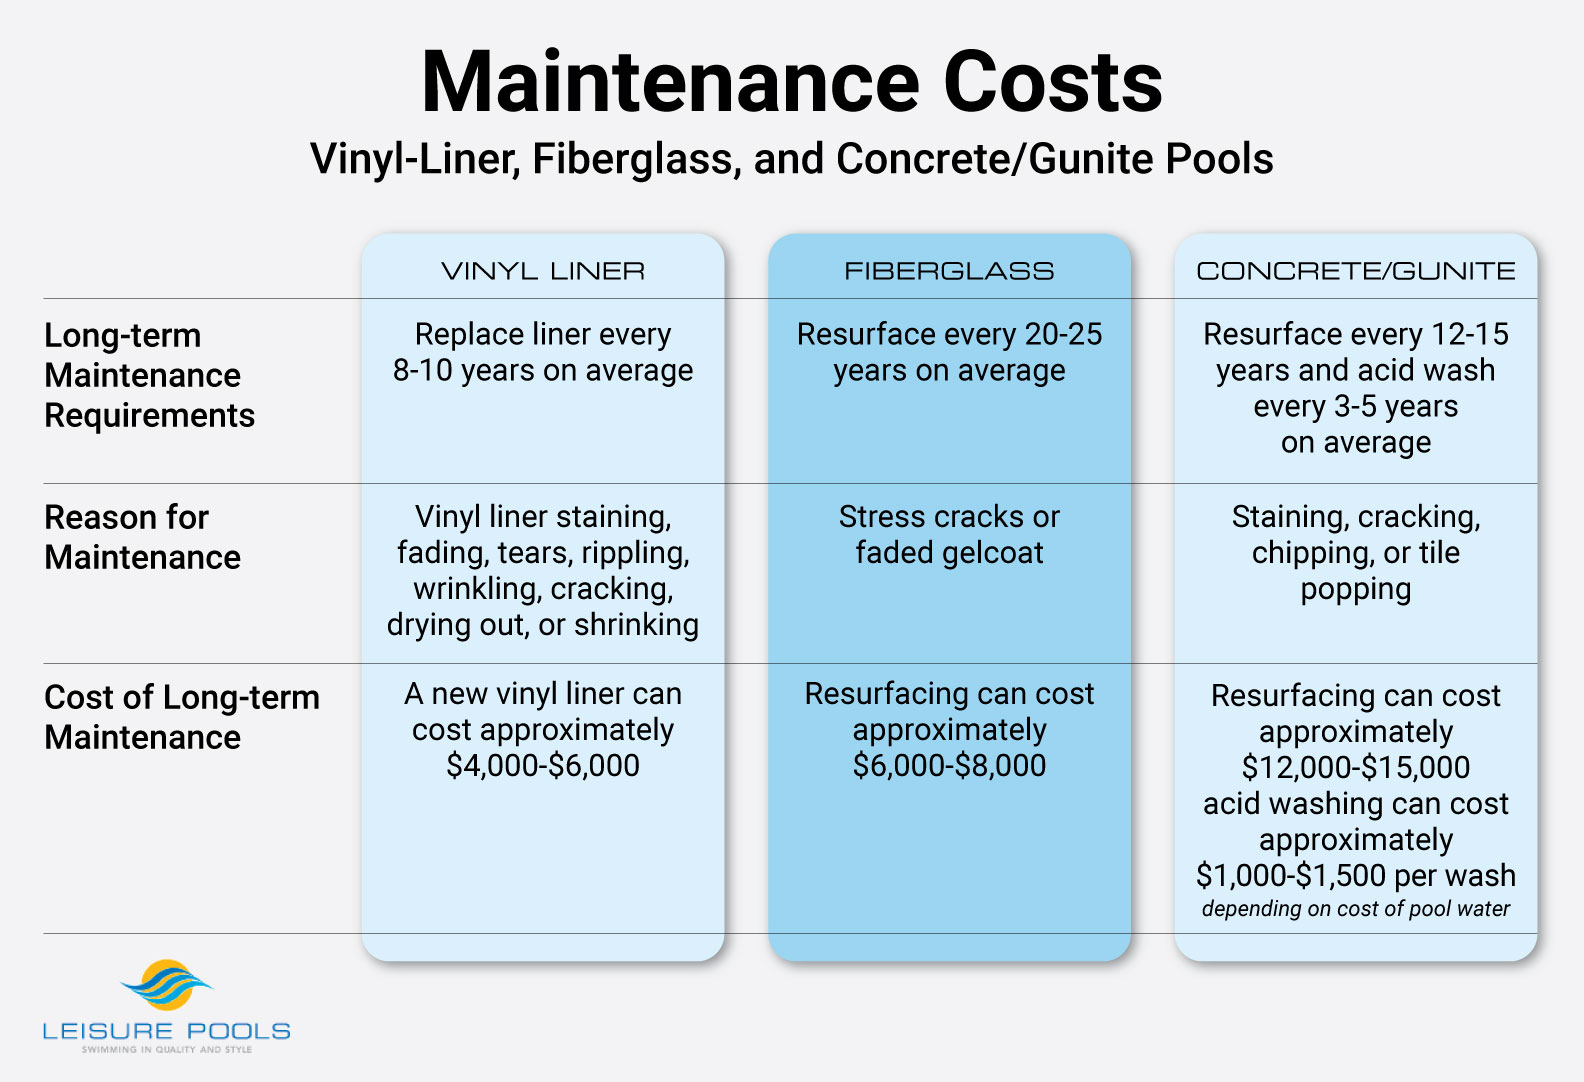 Water Chemistry Pools Maintenance Costs